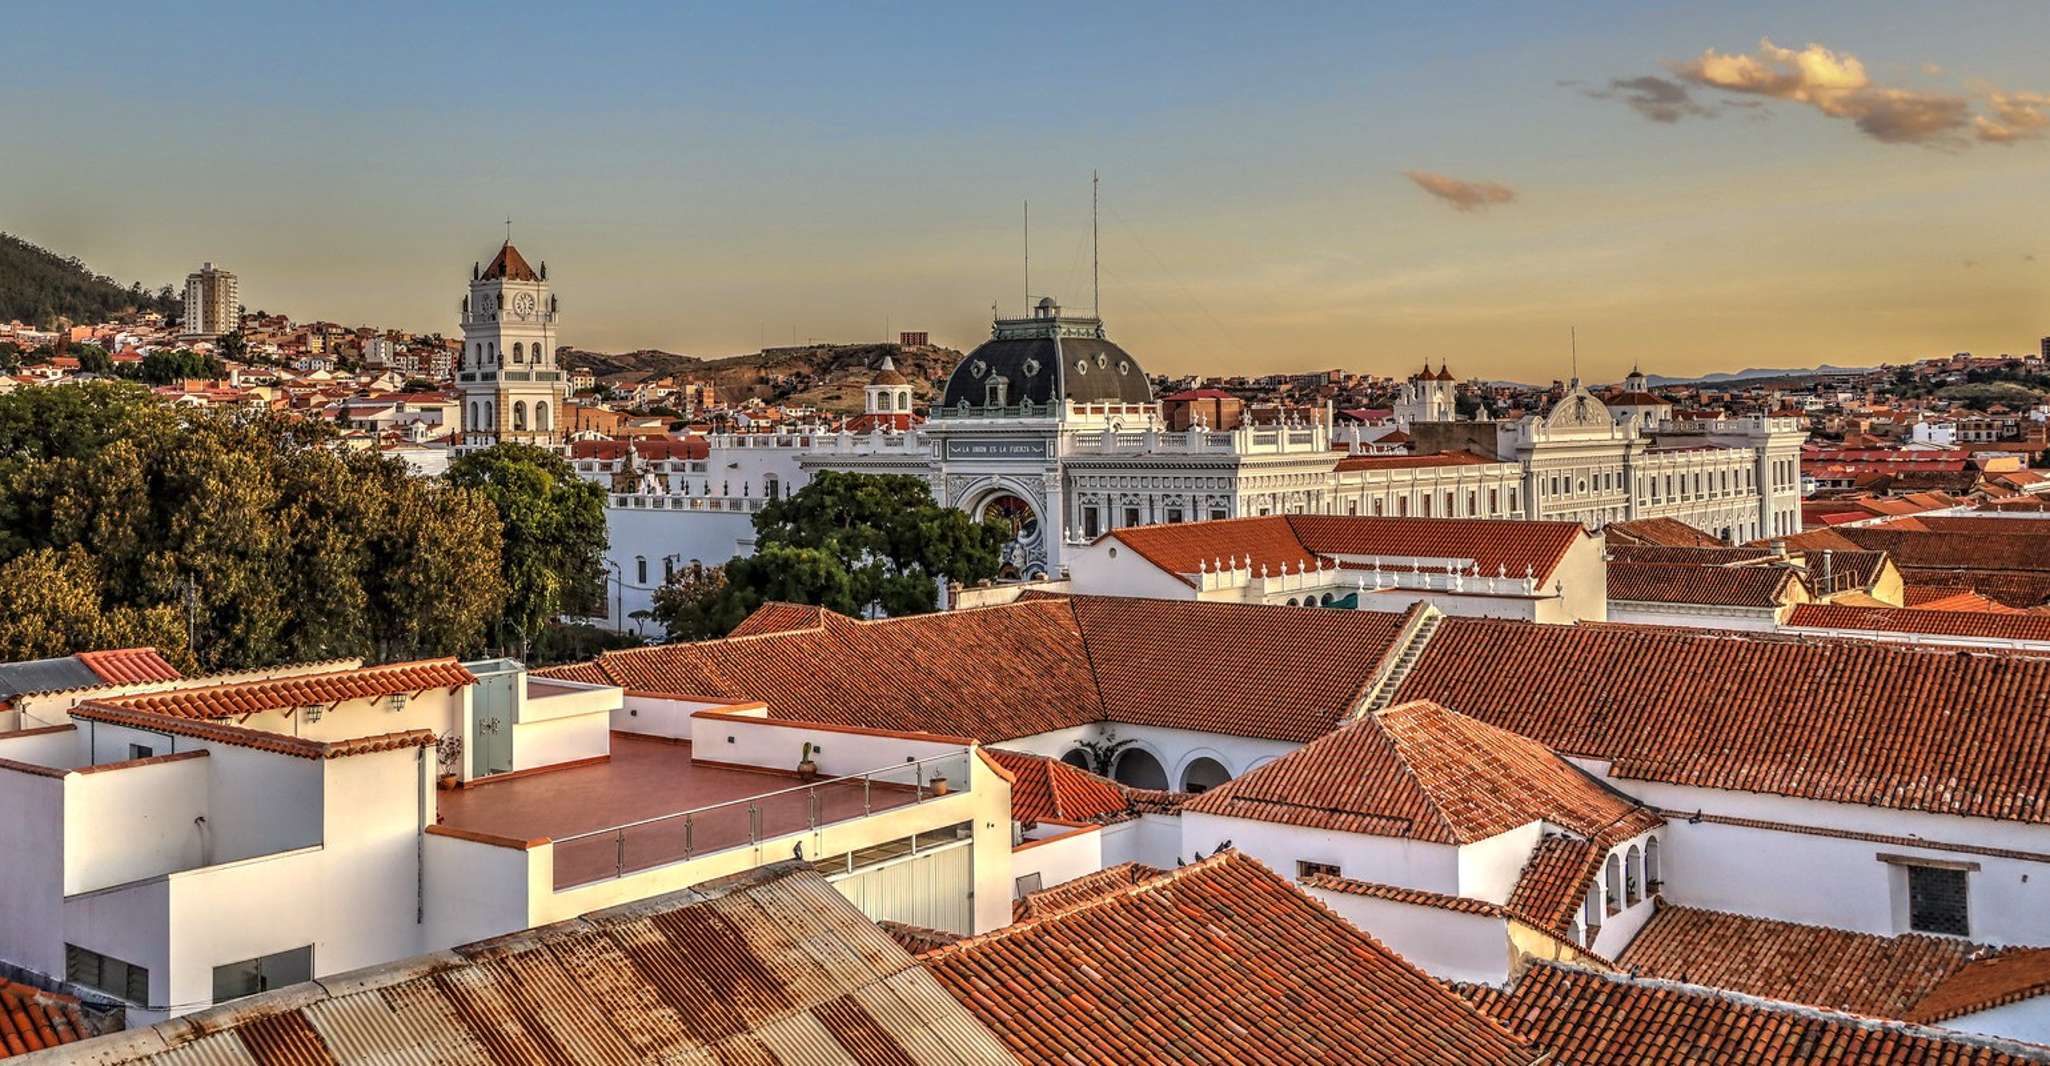 Walking tour in Sucre, History, Culture & Amazing Views